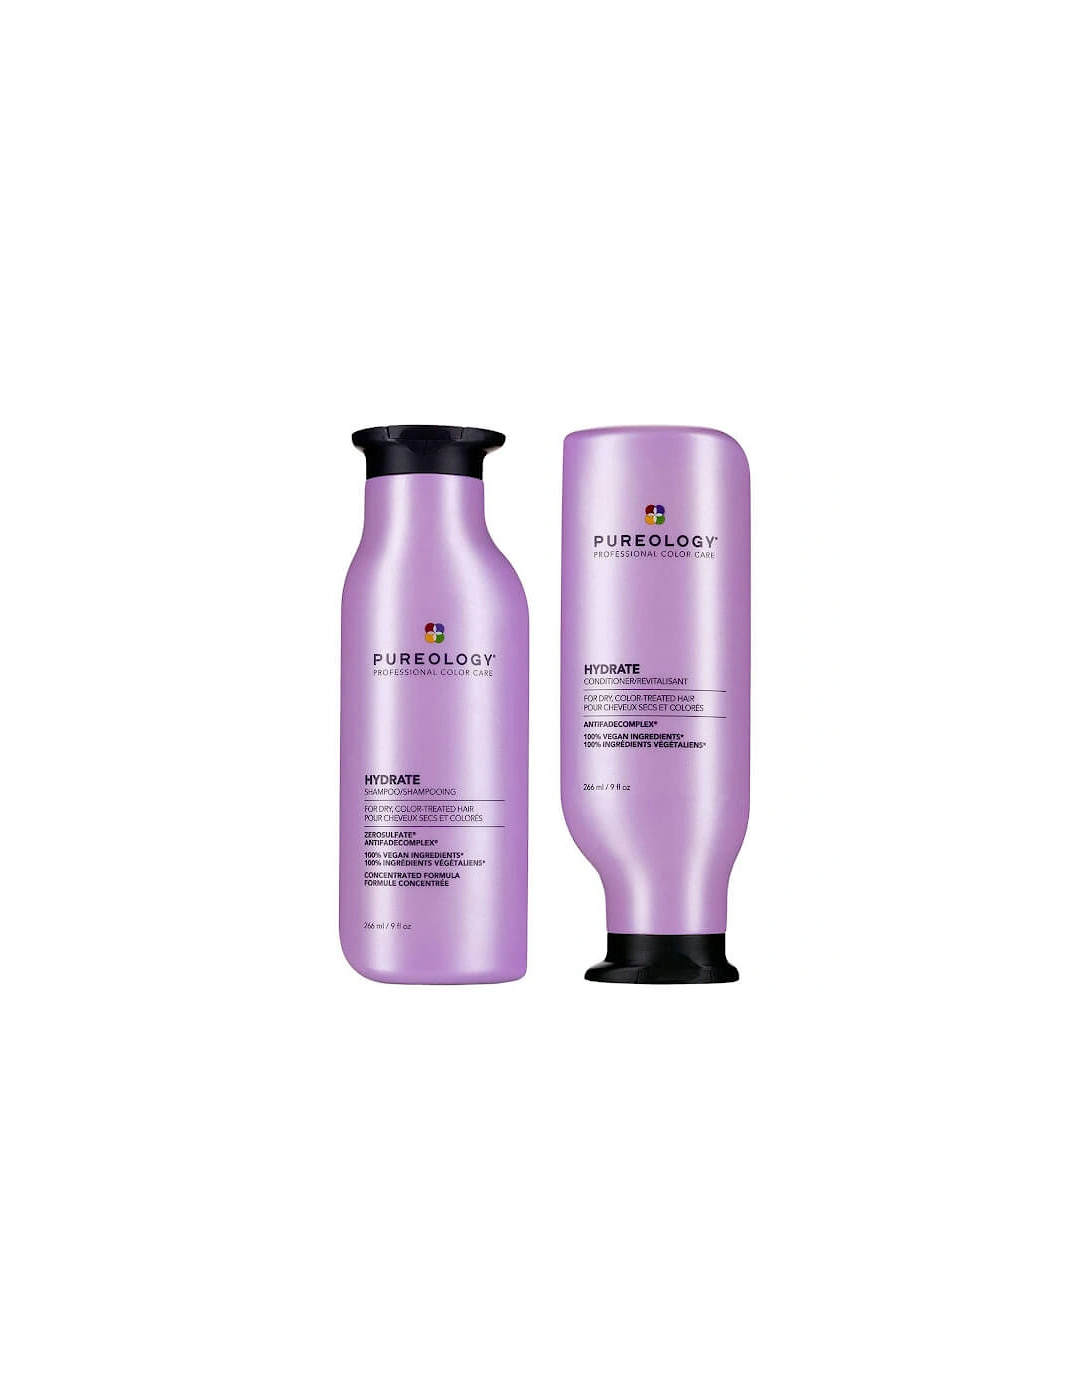 Hydrate Shampoo and Conditioner Moisturising Bundle for Dry Hair, Sulphate Free for a Gentle Cleanse - Pureology, 2 of 1